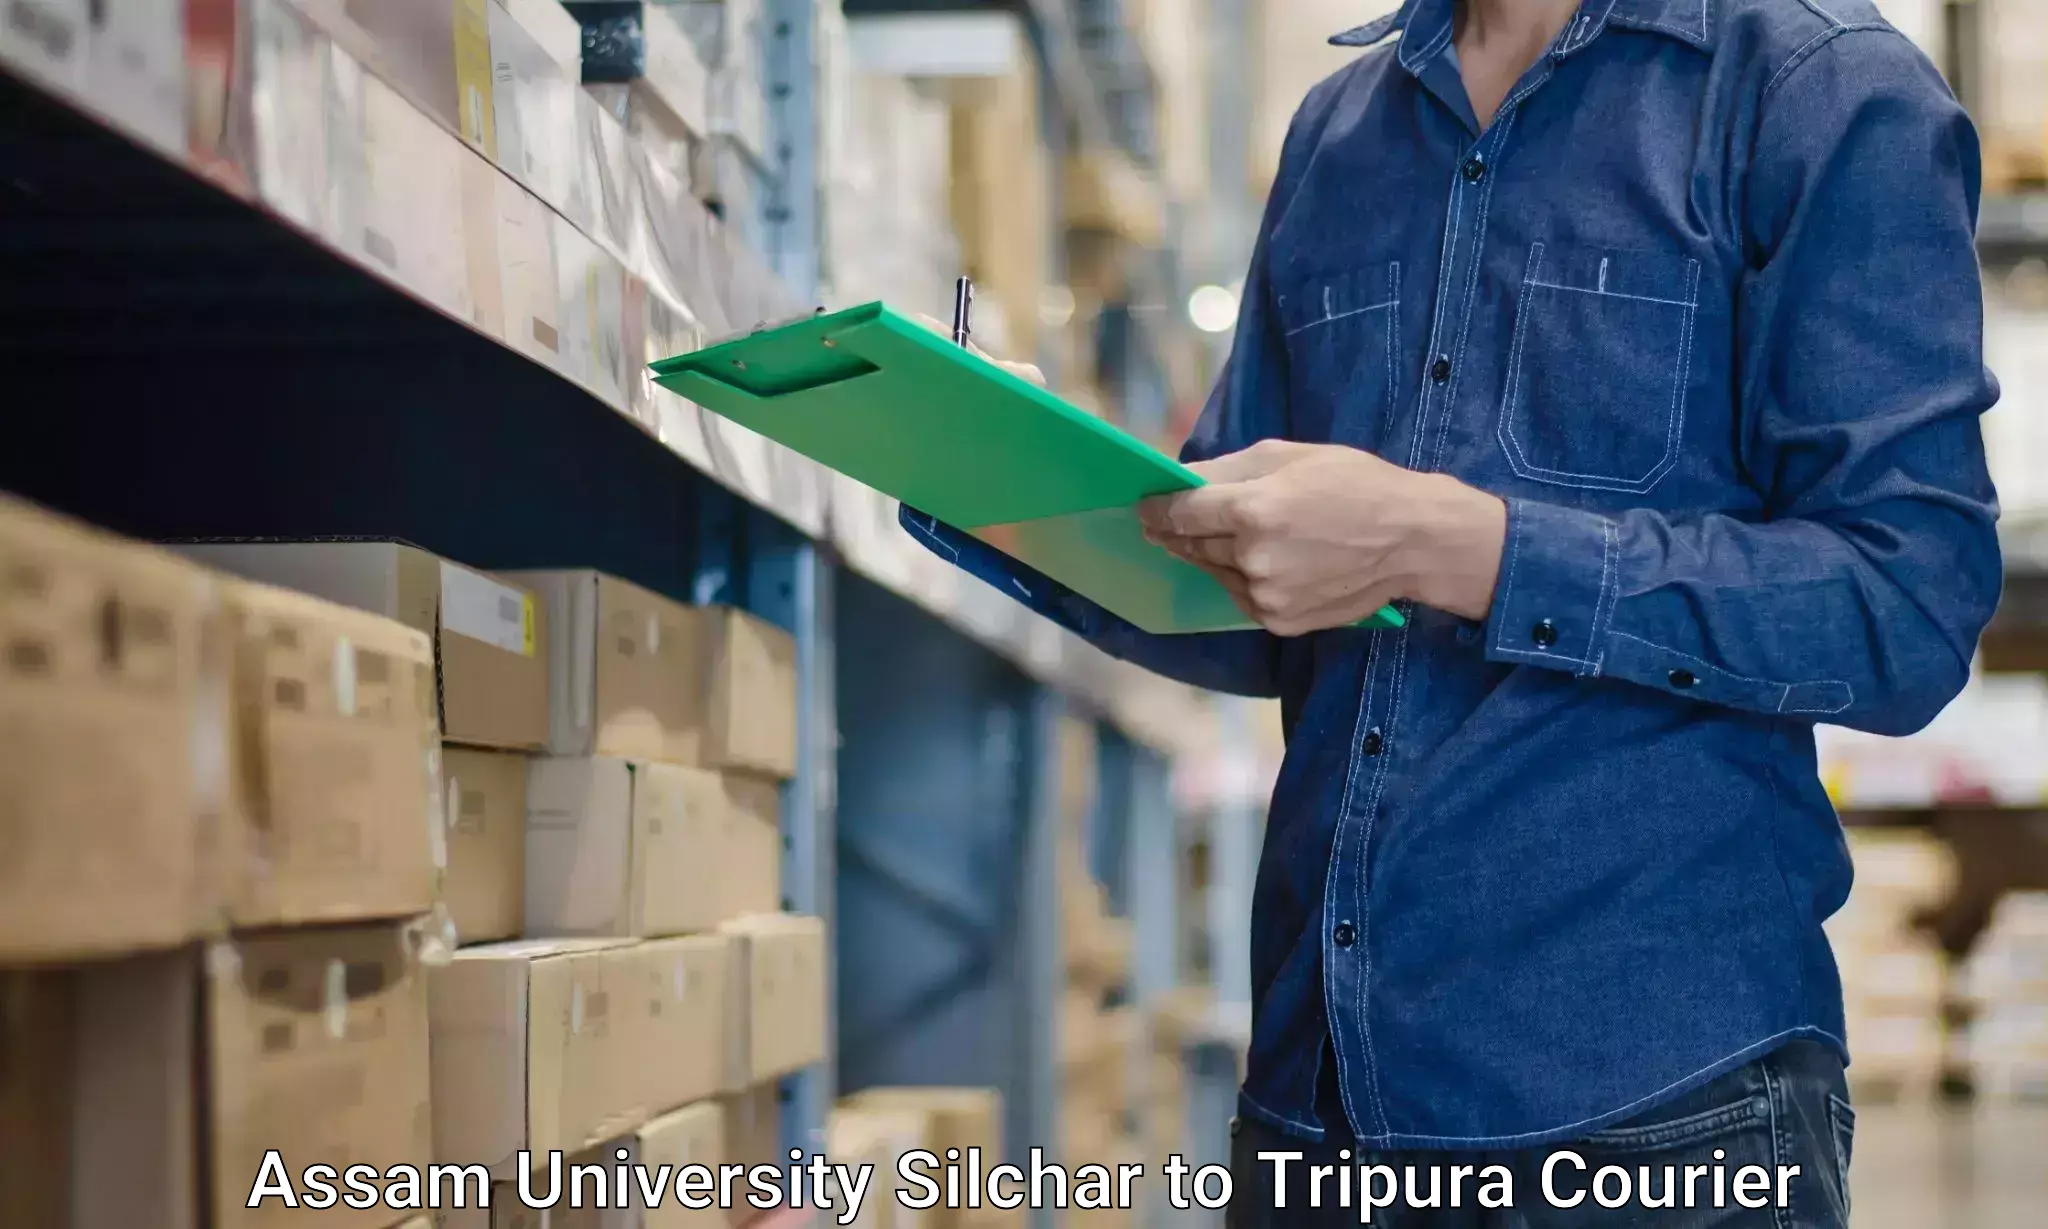 Reliable movers Assam University Silchar to Tripura